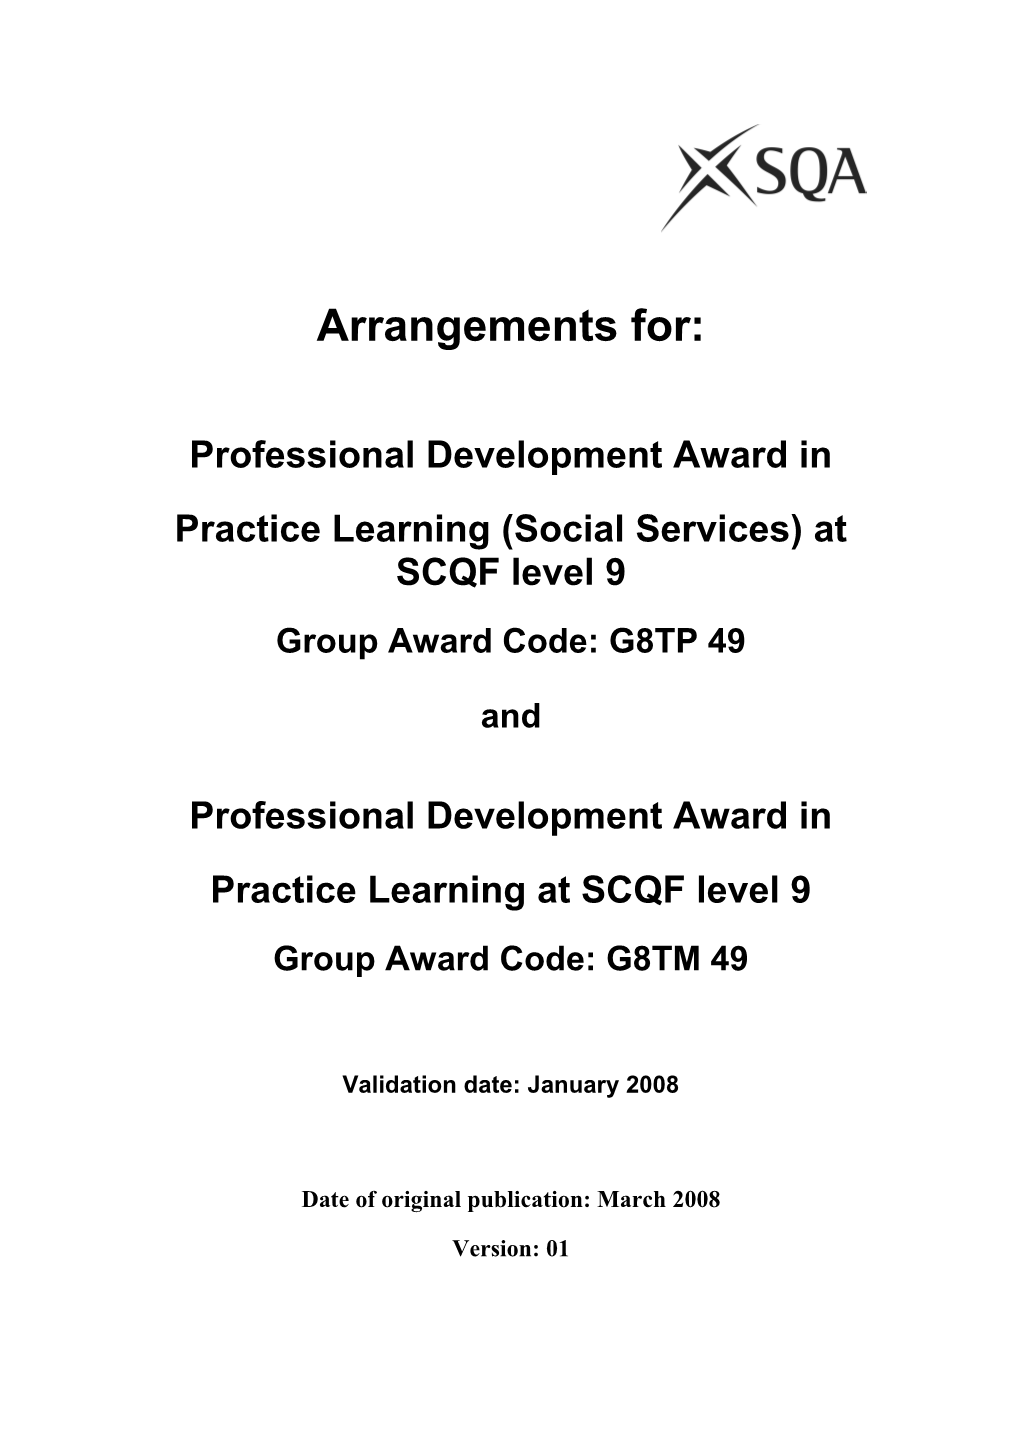 Practice Learning (Social Services) at SCQF Level 9